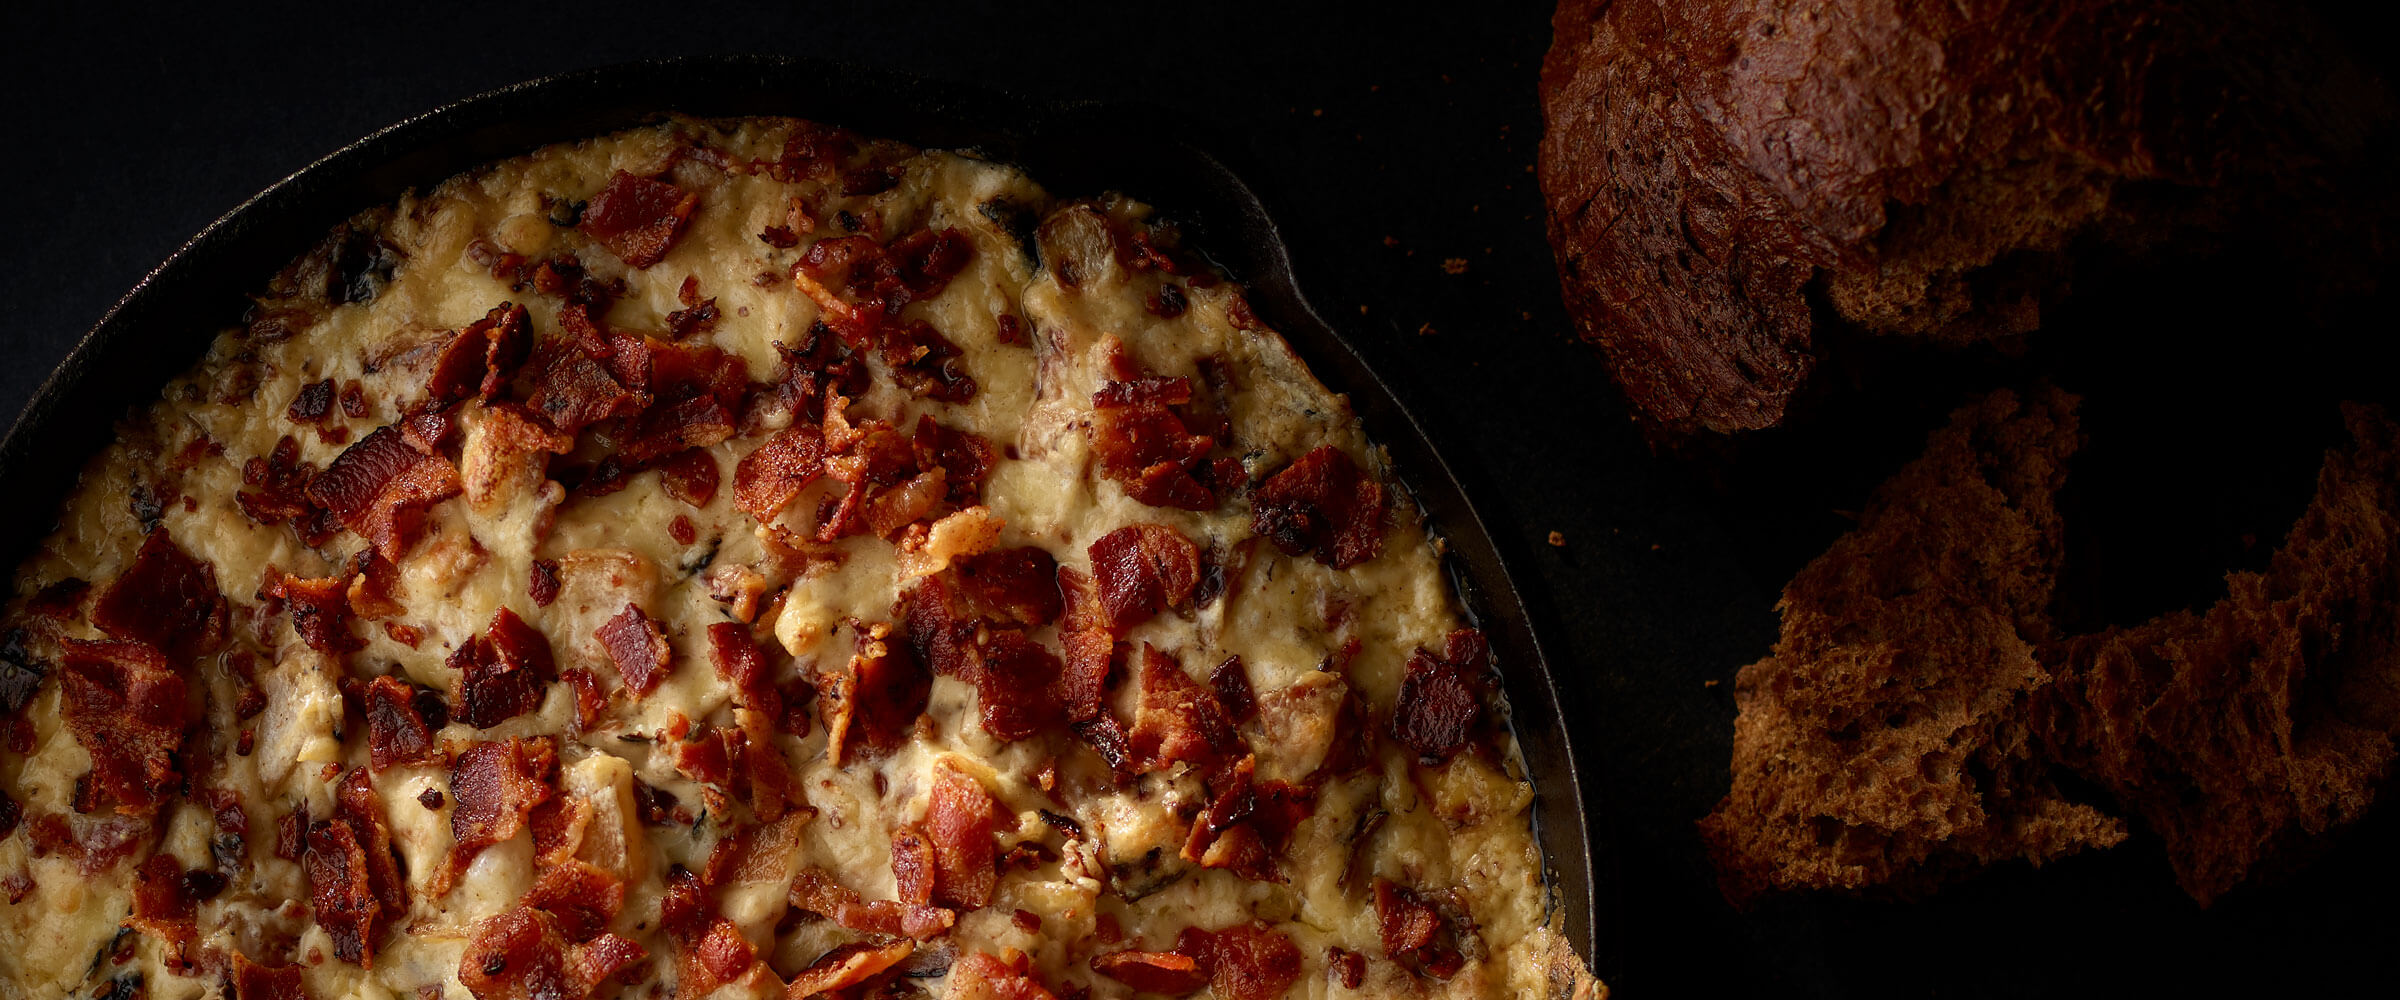 Smokey Bacon Onion Dip in cast iron skillet with bread for dipping